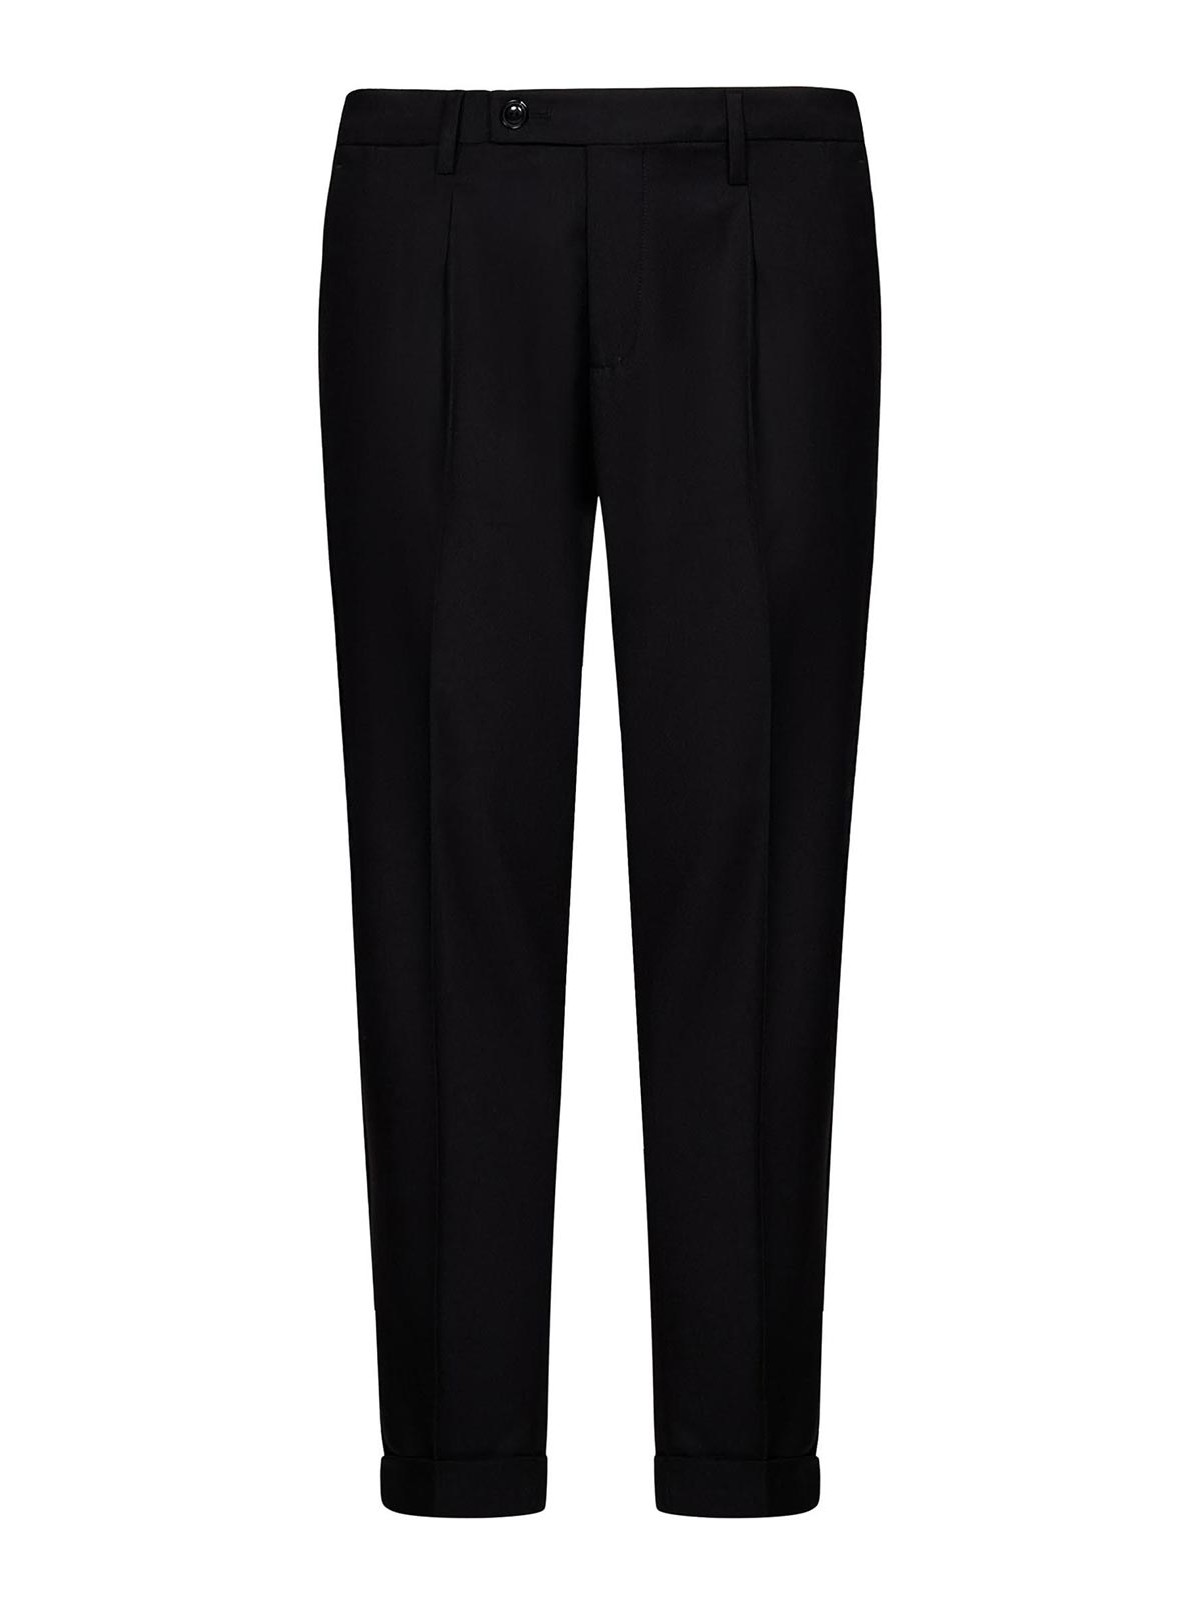 Michele Carbone Black Tailored Trousers